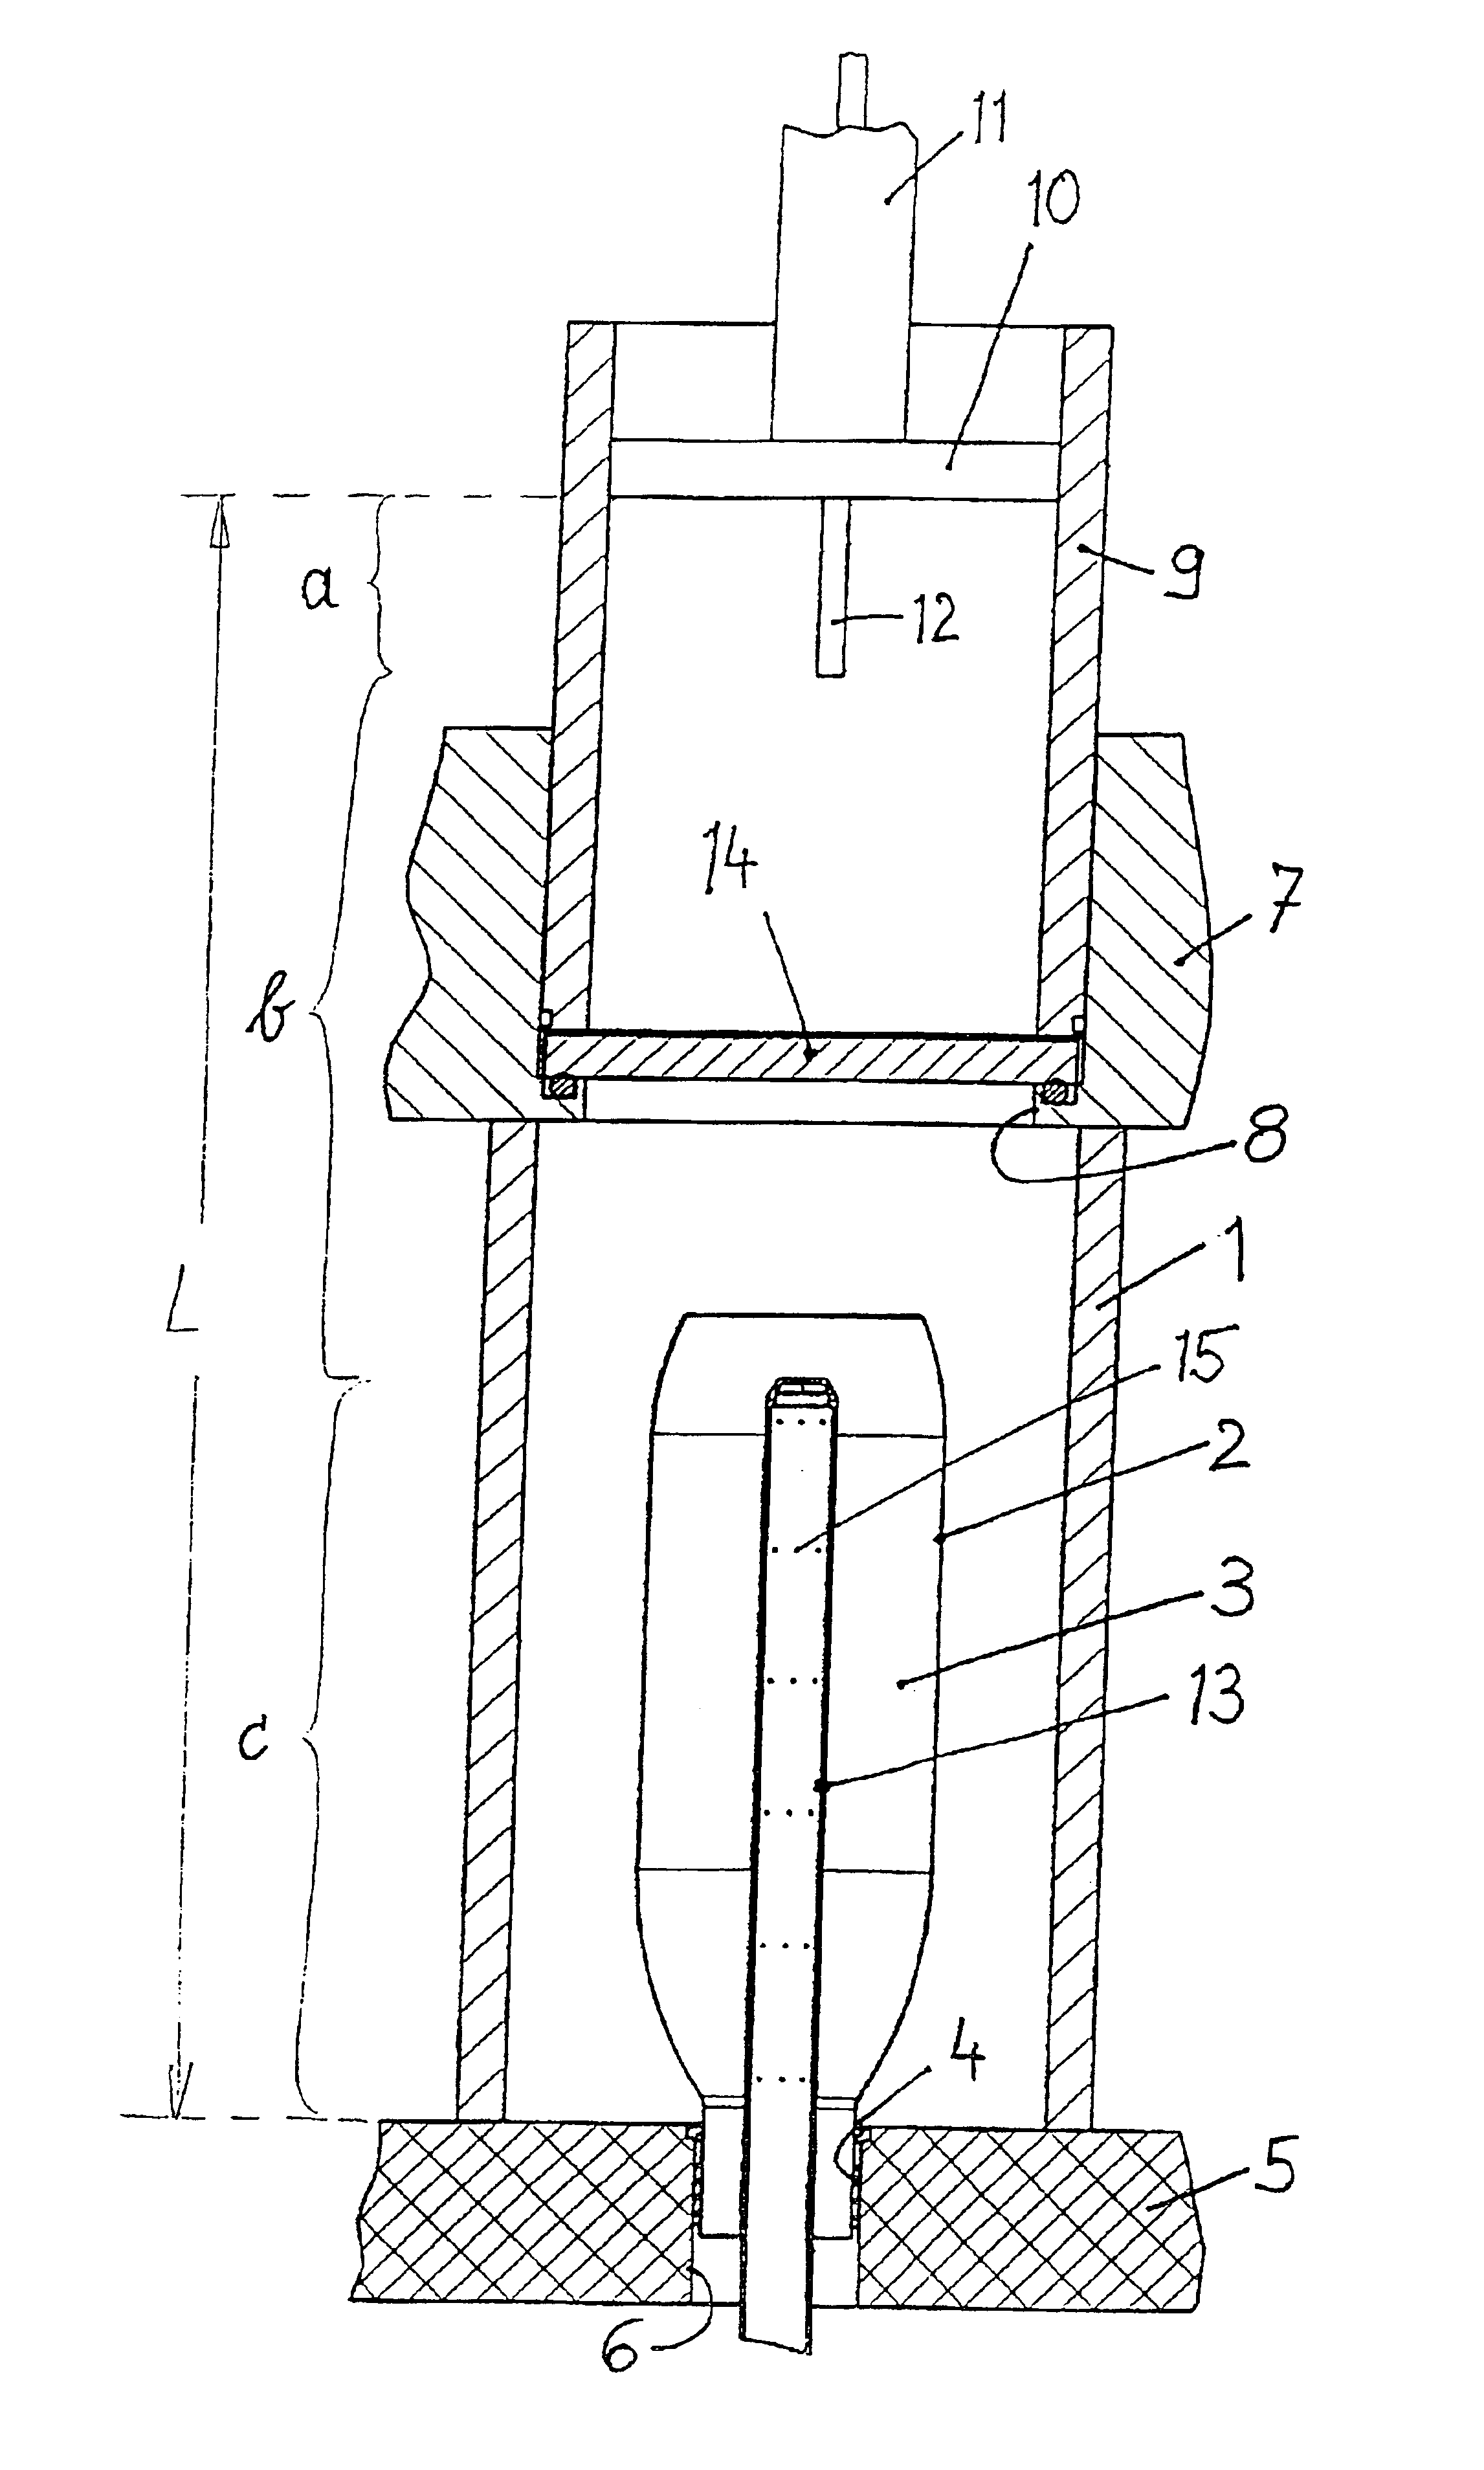 Arrangement for coupling microwave energy into a treatment chamber